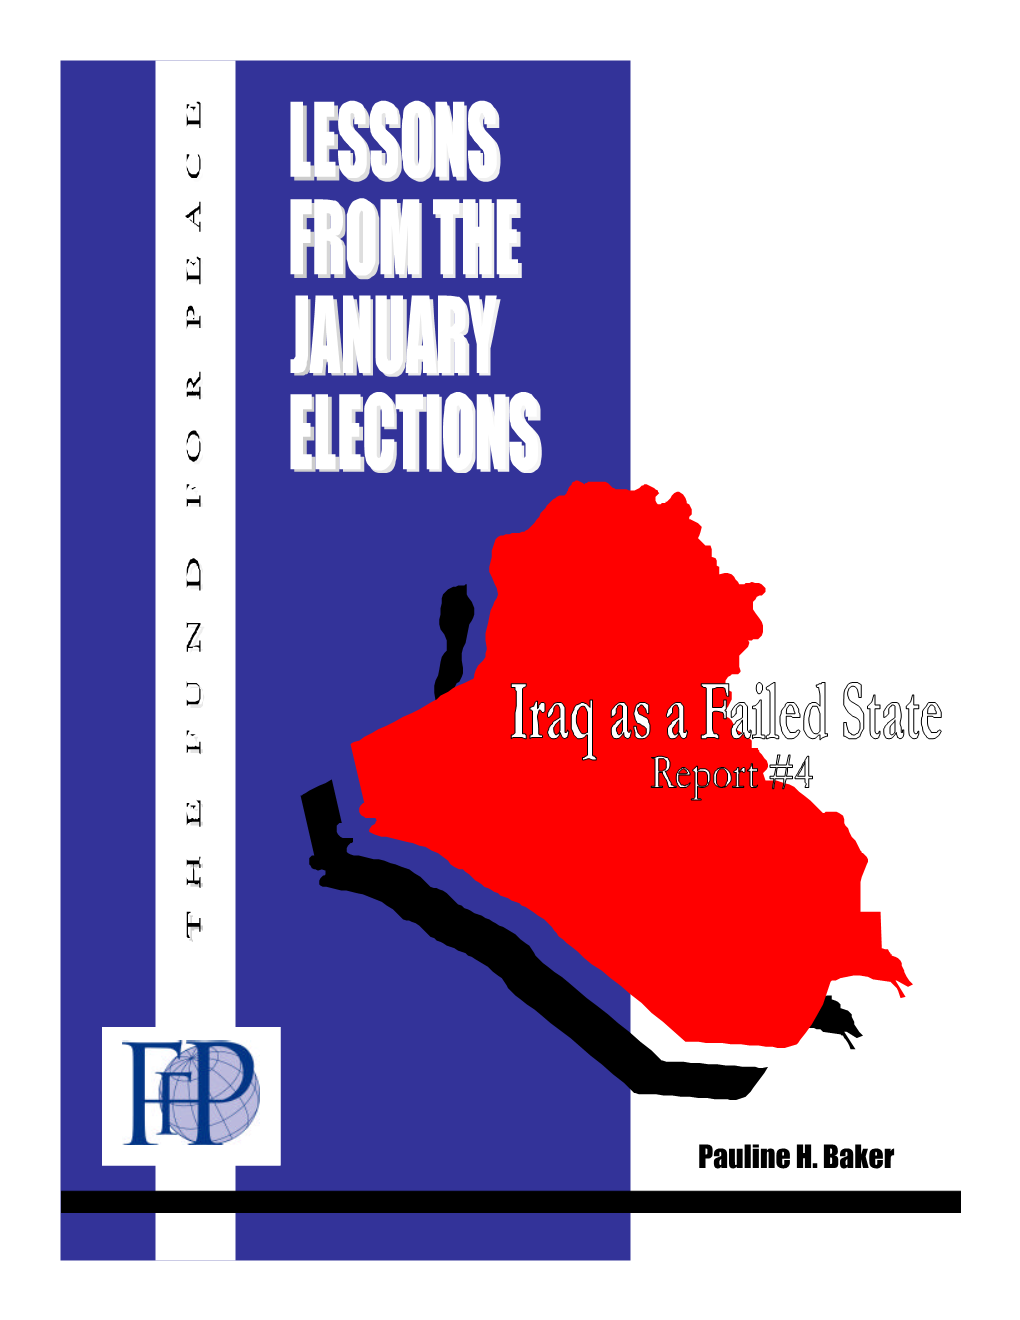 Iraq As a Failed State Report #4